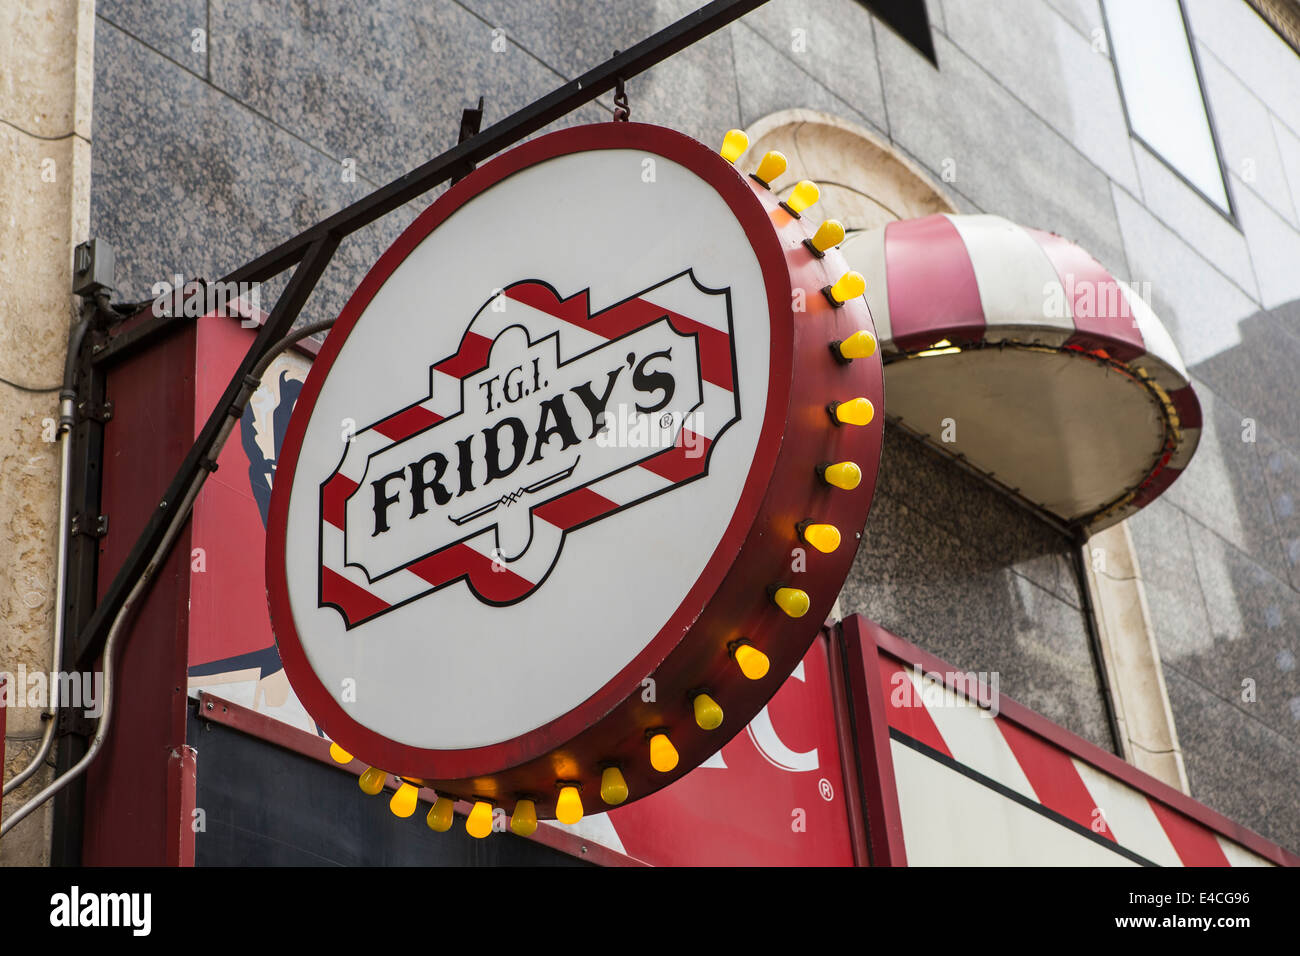 A T.G.I. Friday's restaurant is pictured in the New York City borough of Manhattan, NY Stock Photo